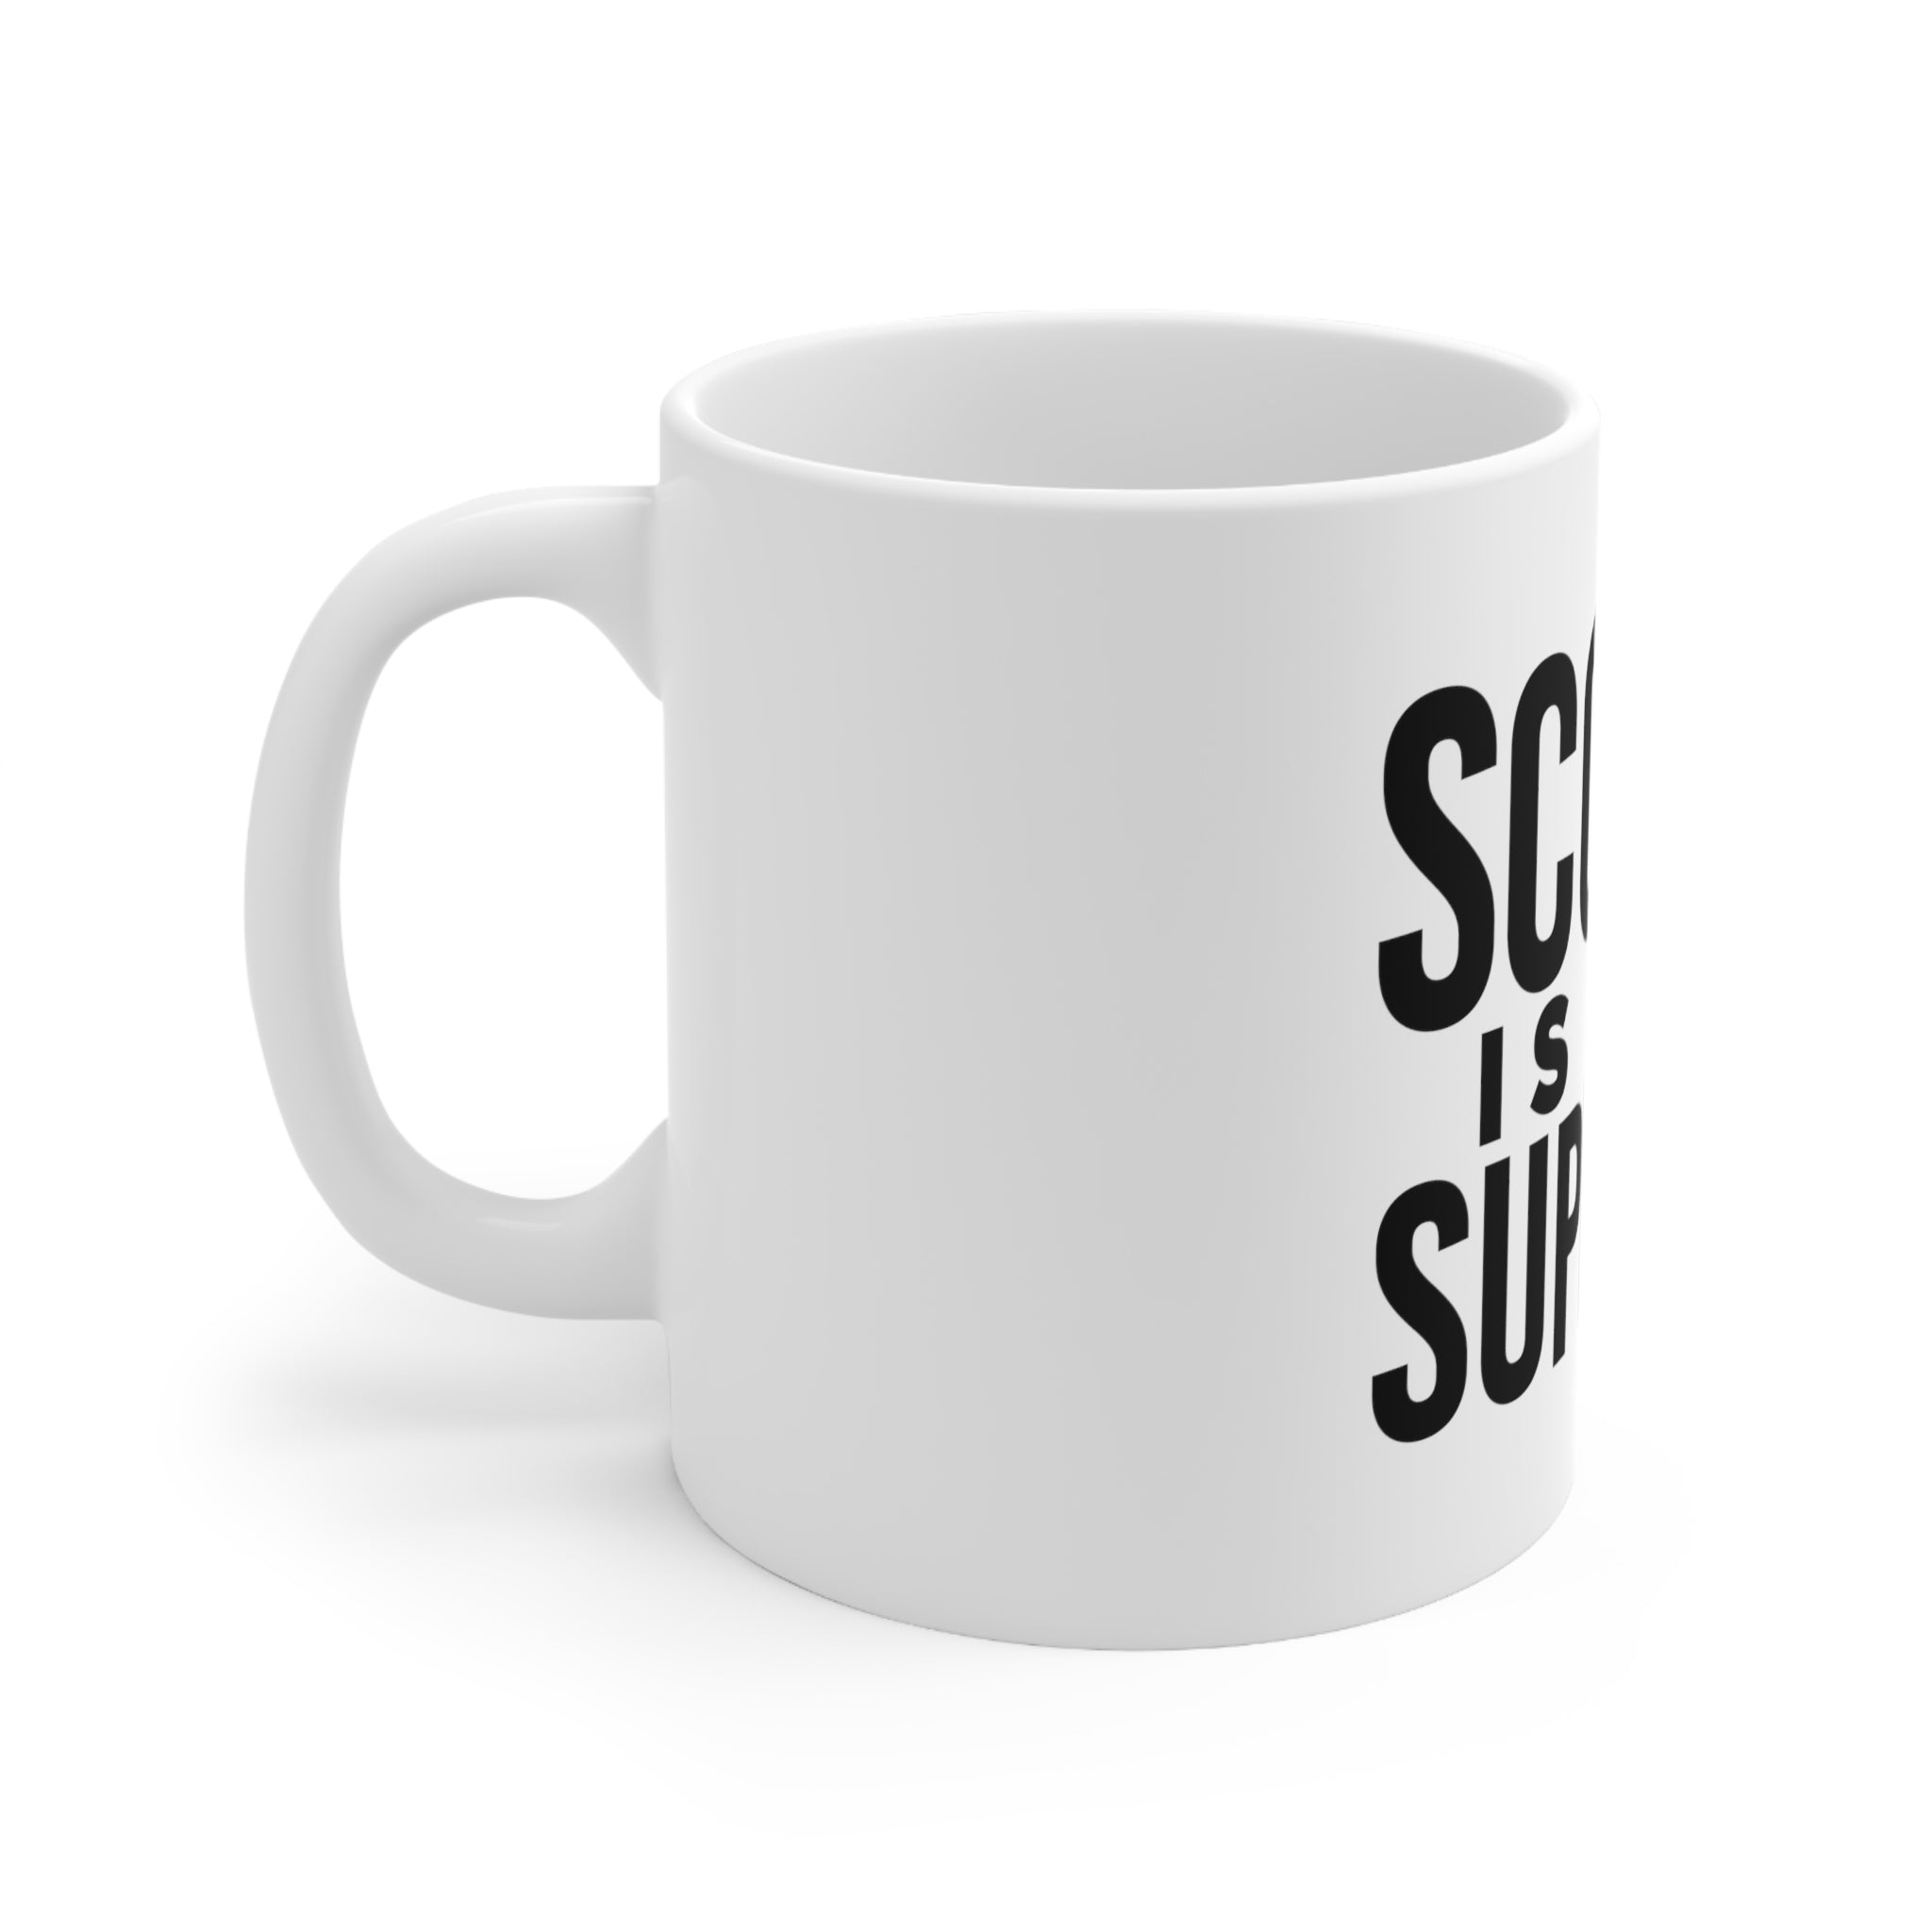 SCOTUS is not Supreme 11 oz Premium White Ceramic Mug-clothing and culture-shop here at-A Perfect Shirt